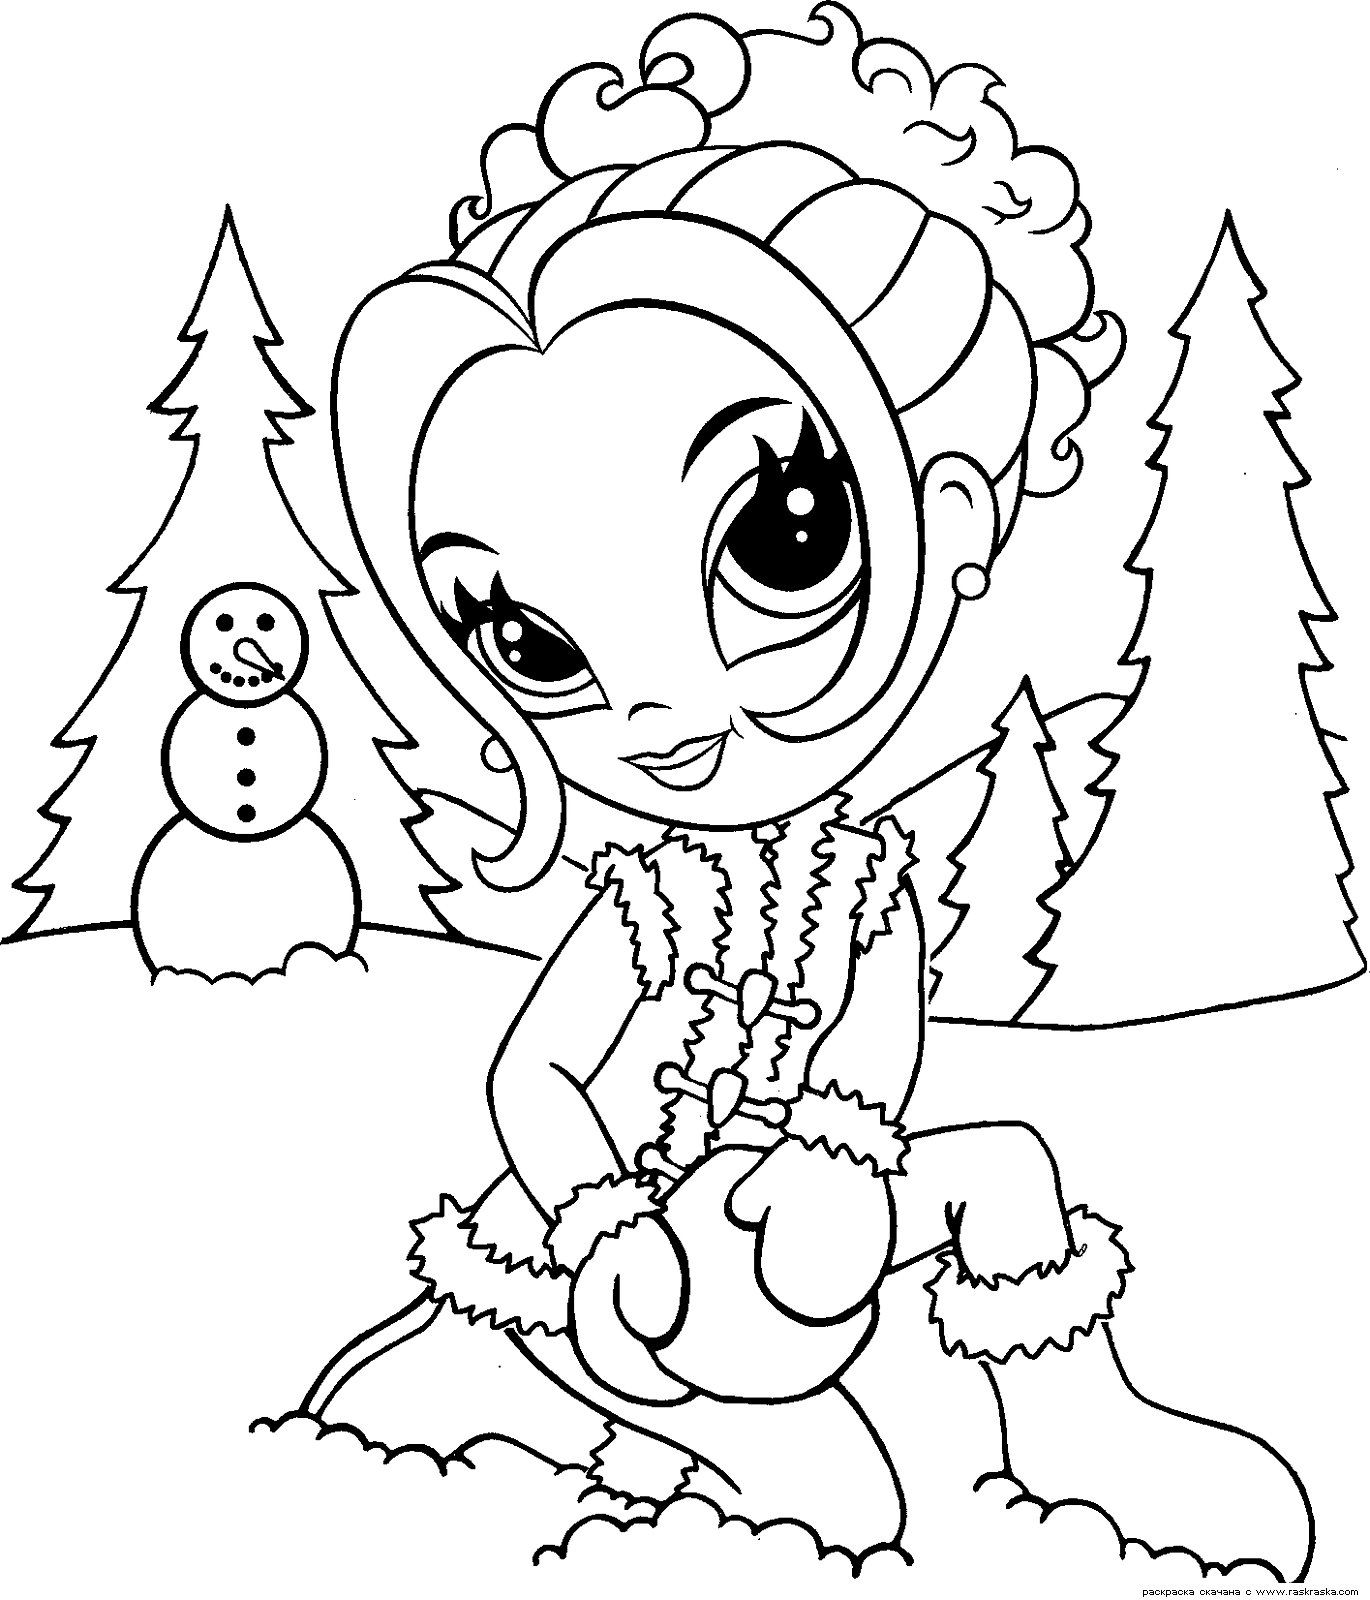 printable lisa frank coloring pages